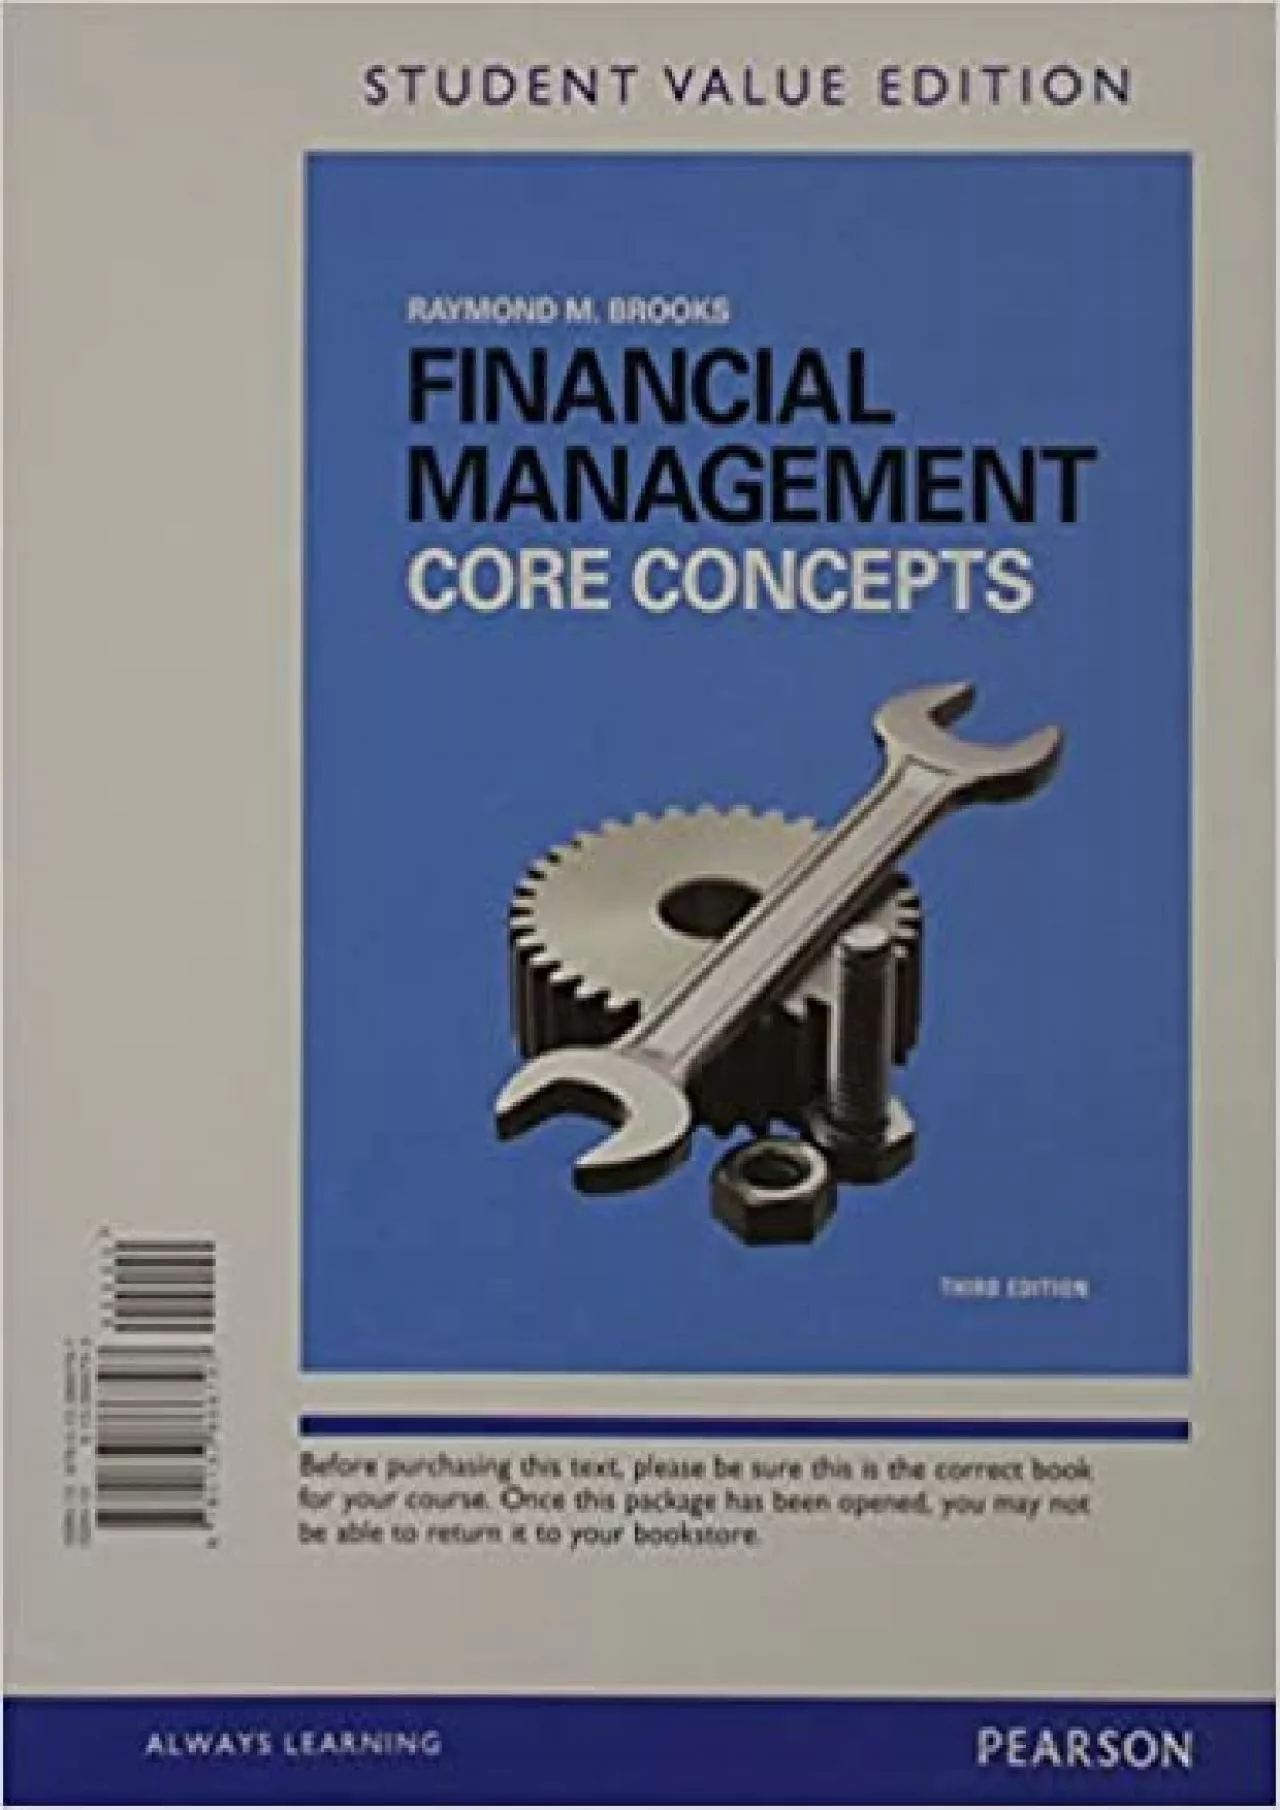 Financial Management: Core Concepts Student Value Edition (Pearson Series in Finance)